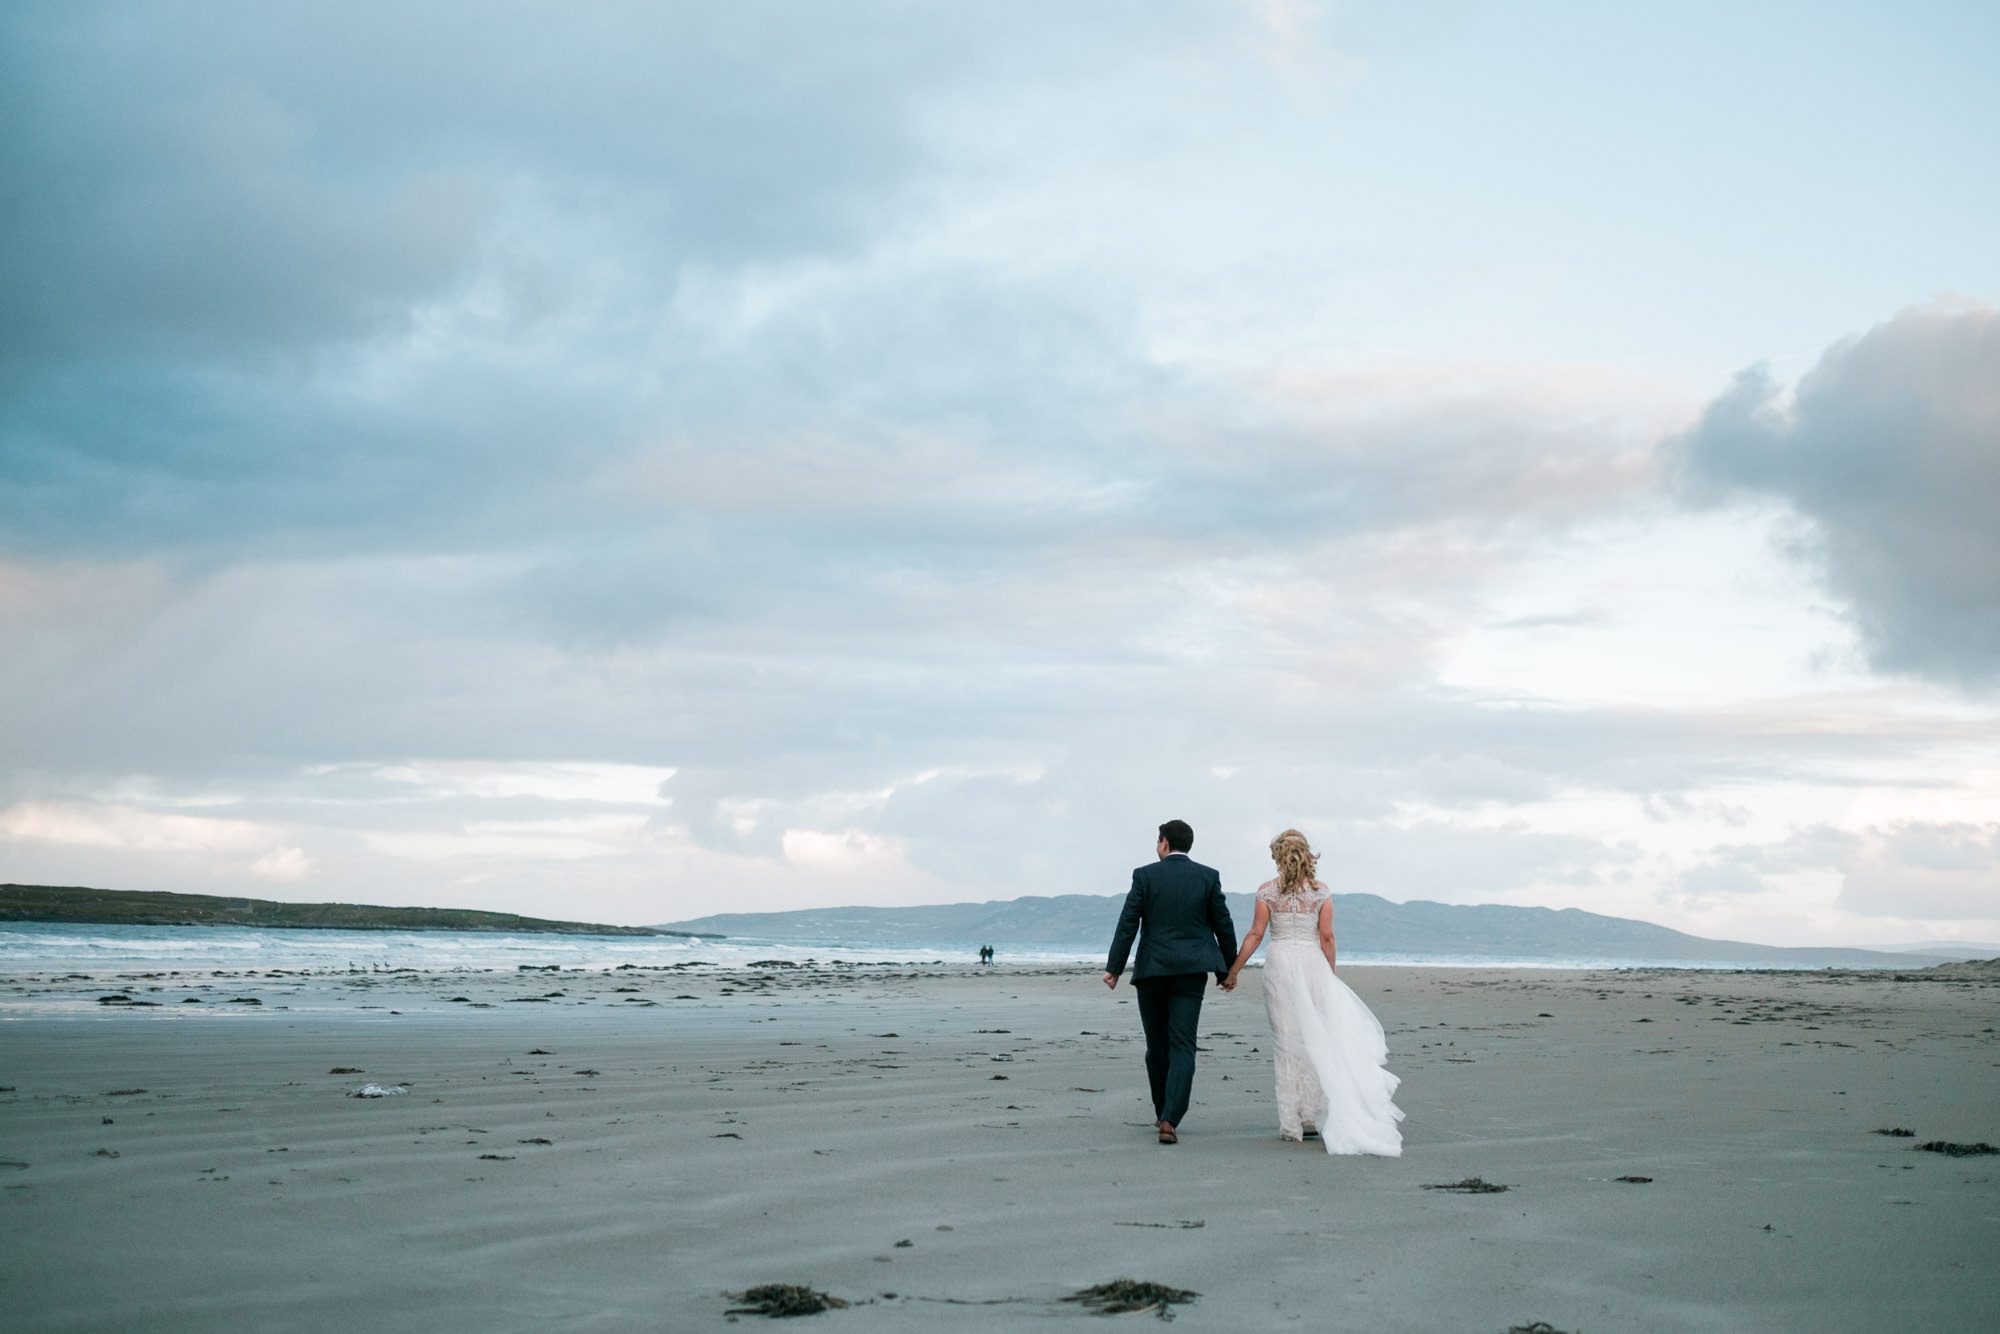 Getting married in Donegal rocks